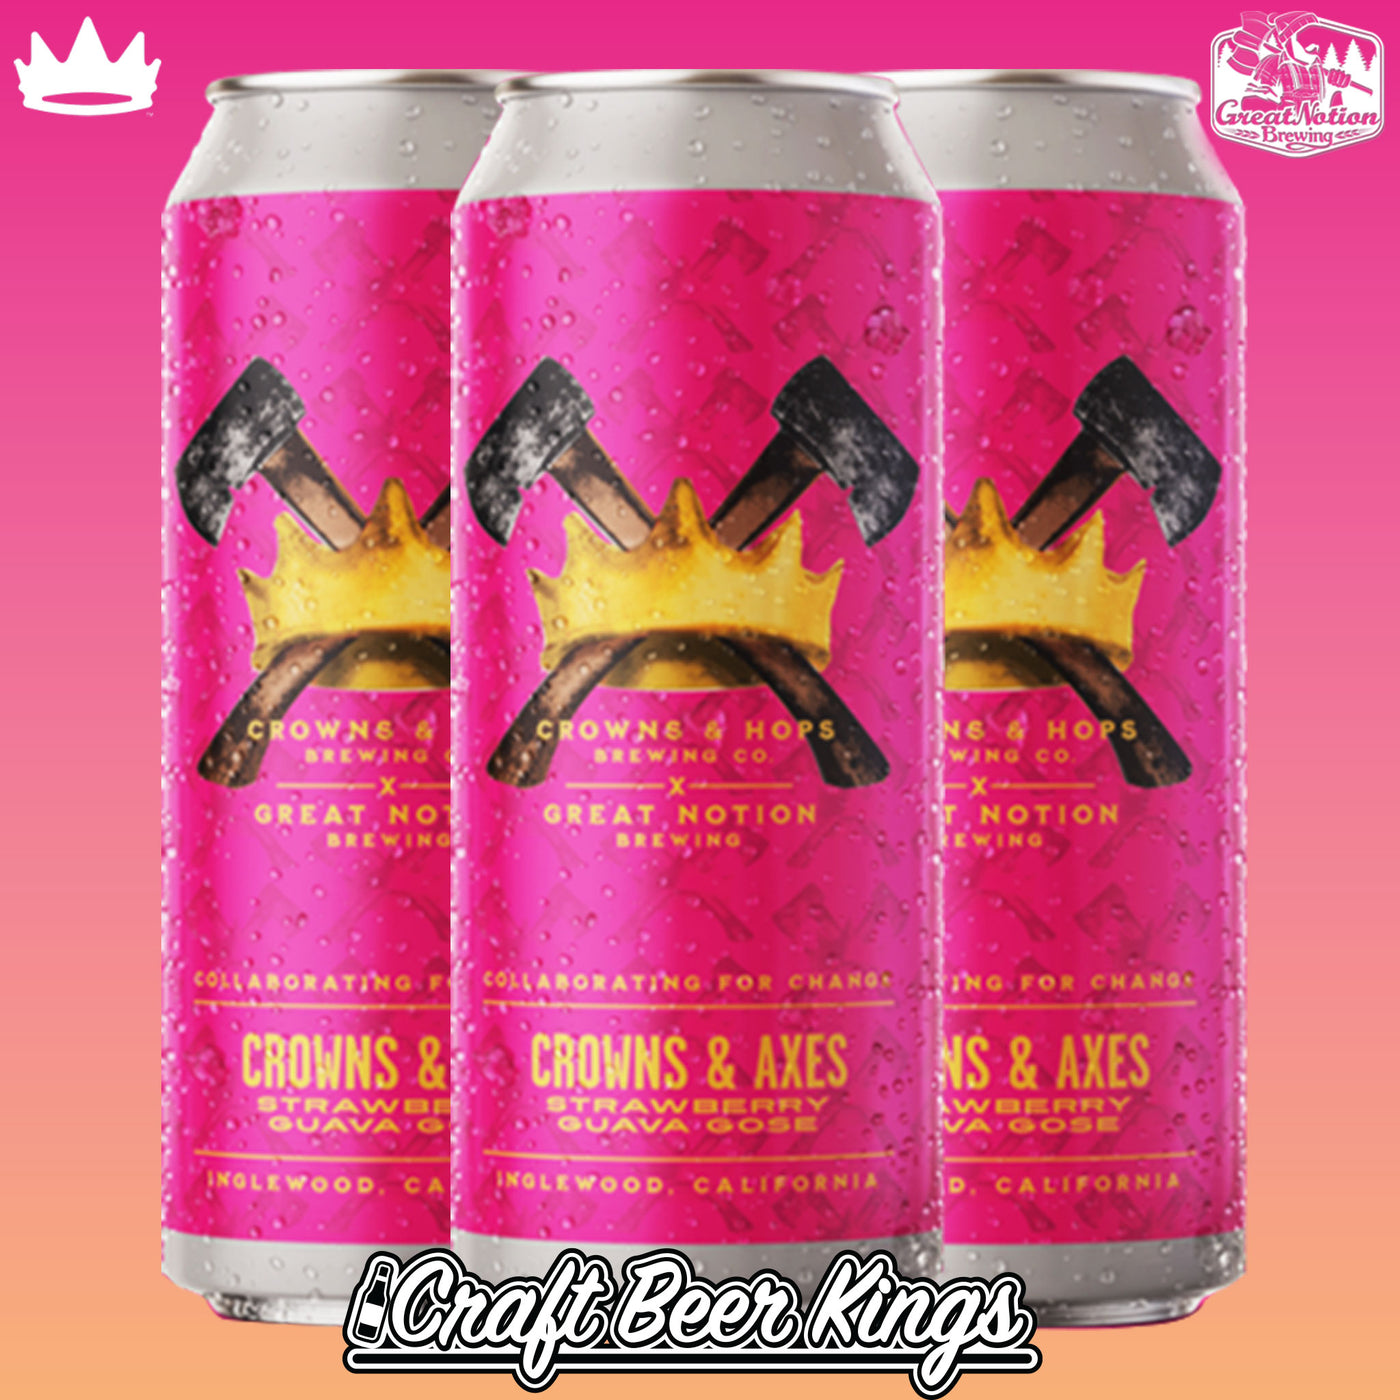 Great Notion x Crowns & Hops - Crowns & Axes